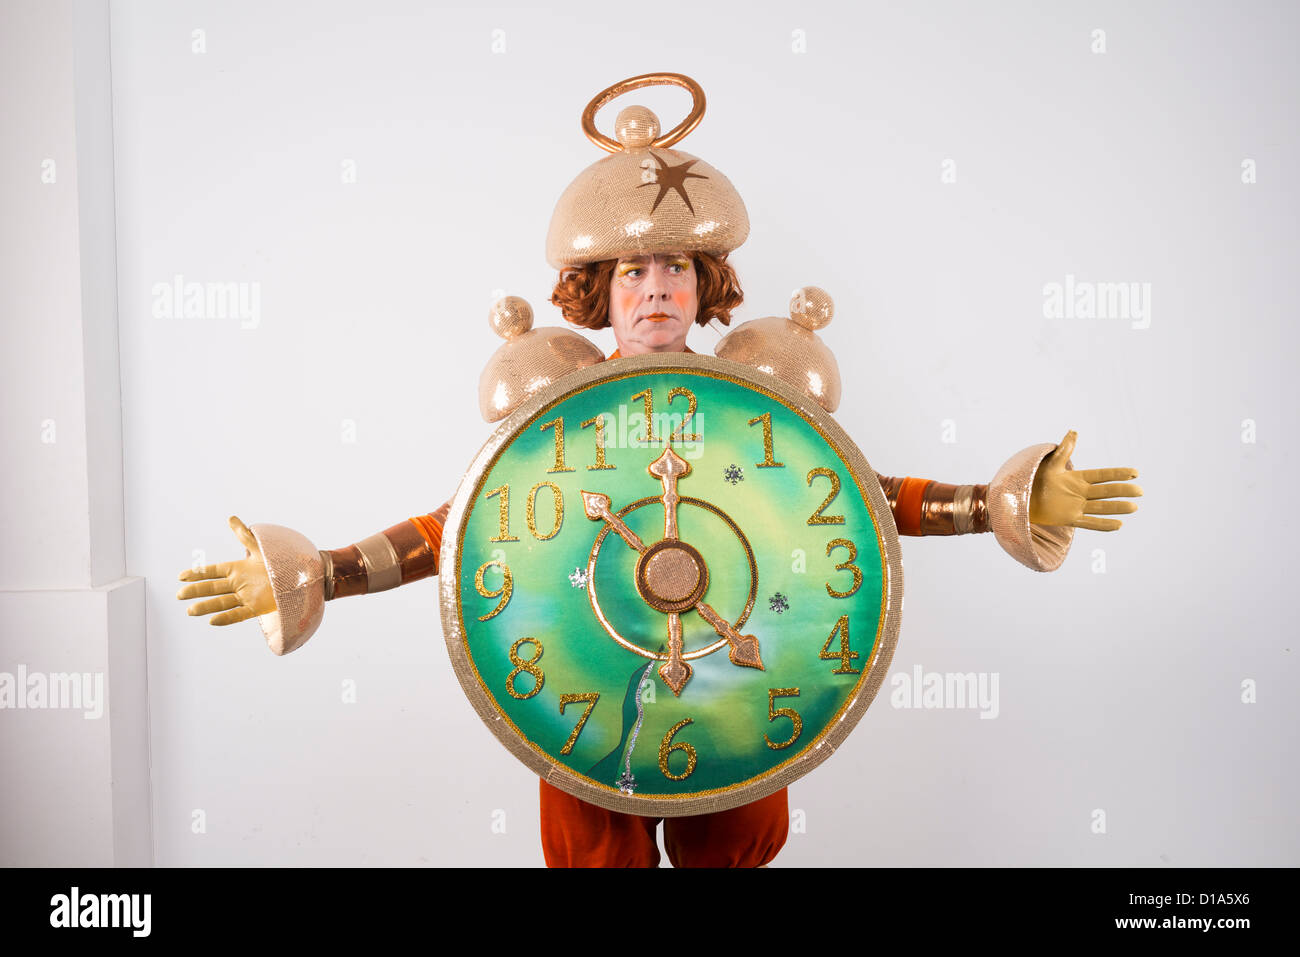 actor costume carnival theatre play person posing one alarm clock man Stock Photo